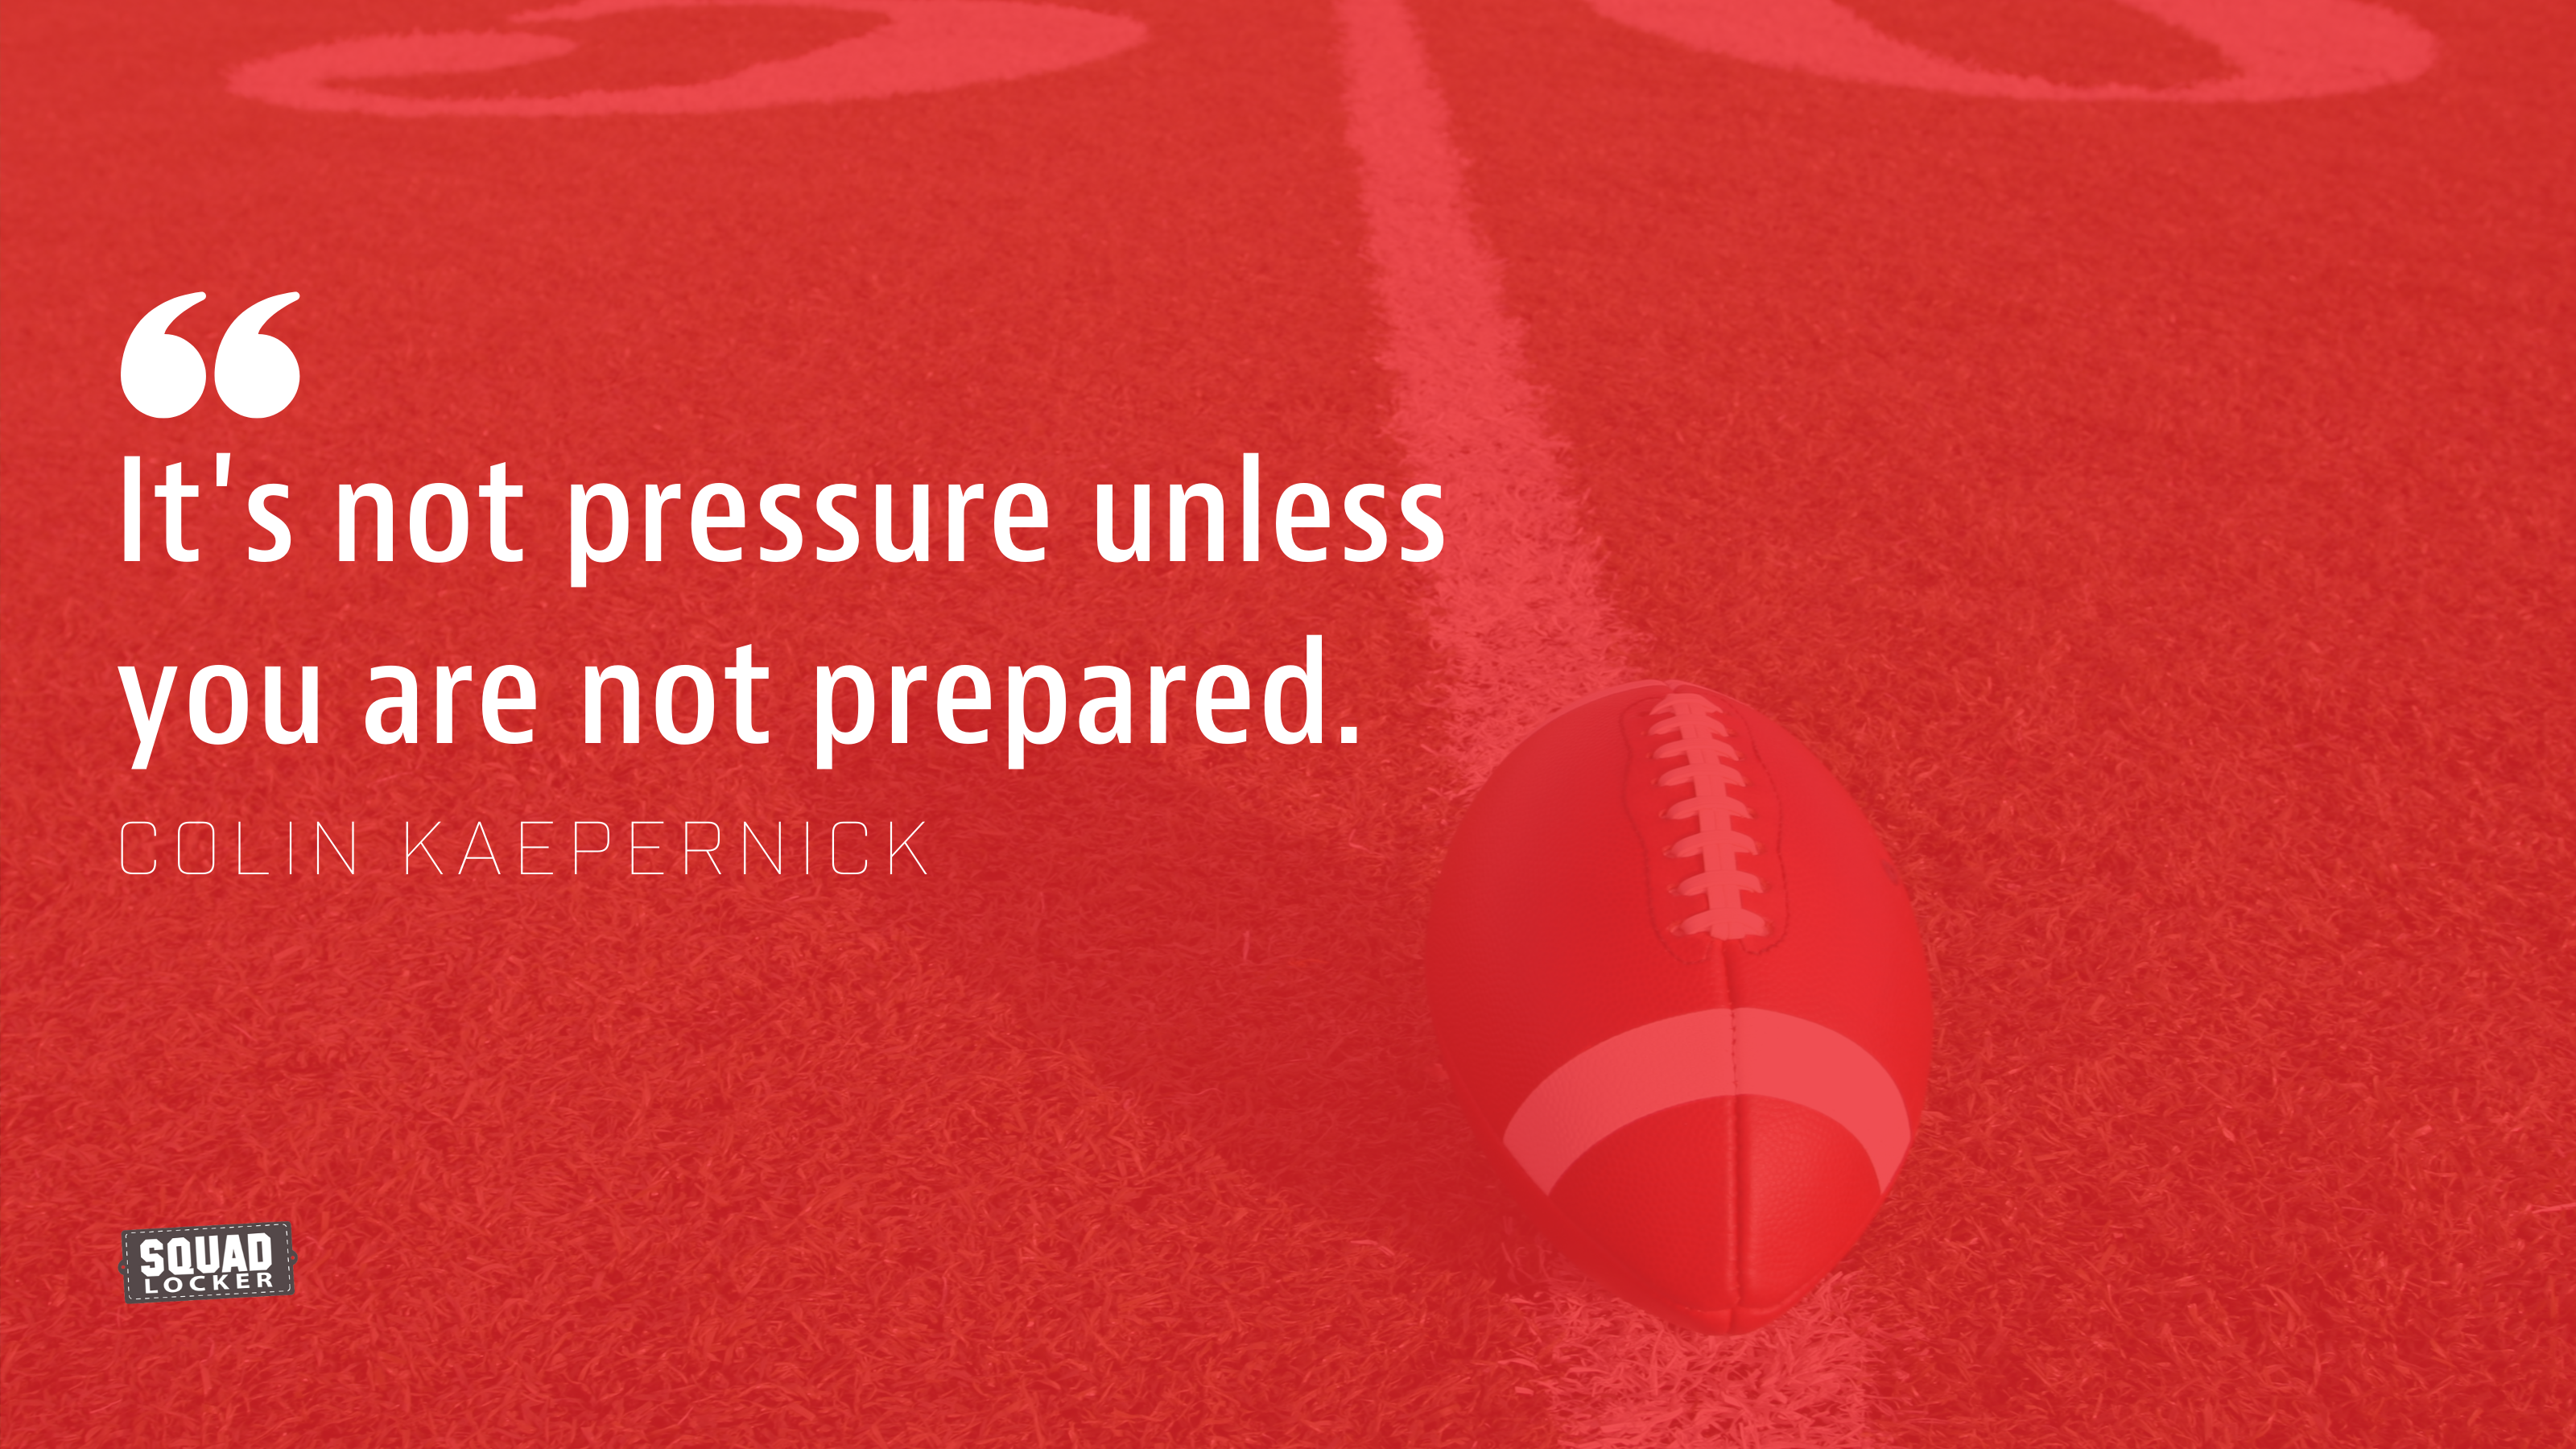 sports quotes motivational football